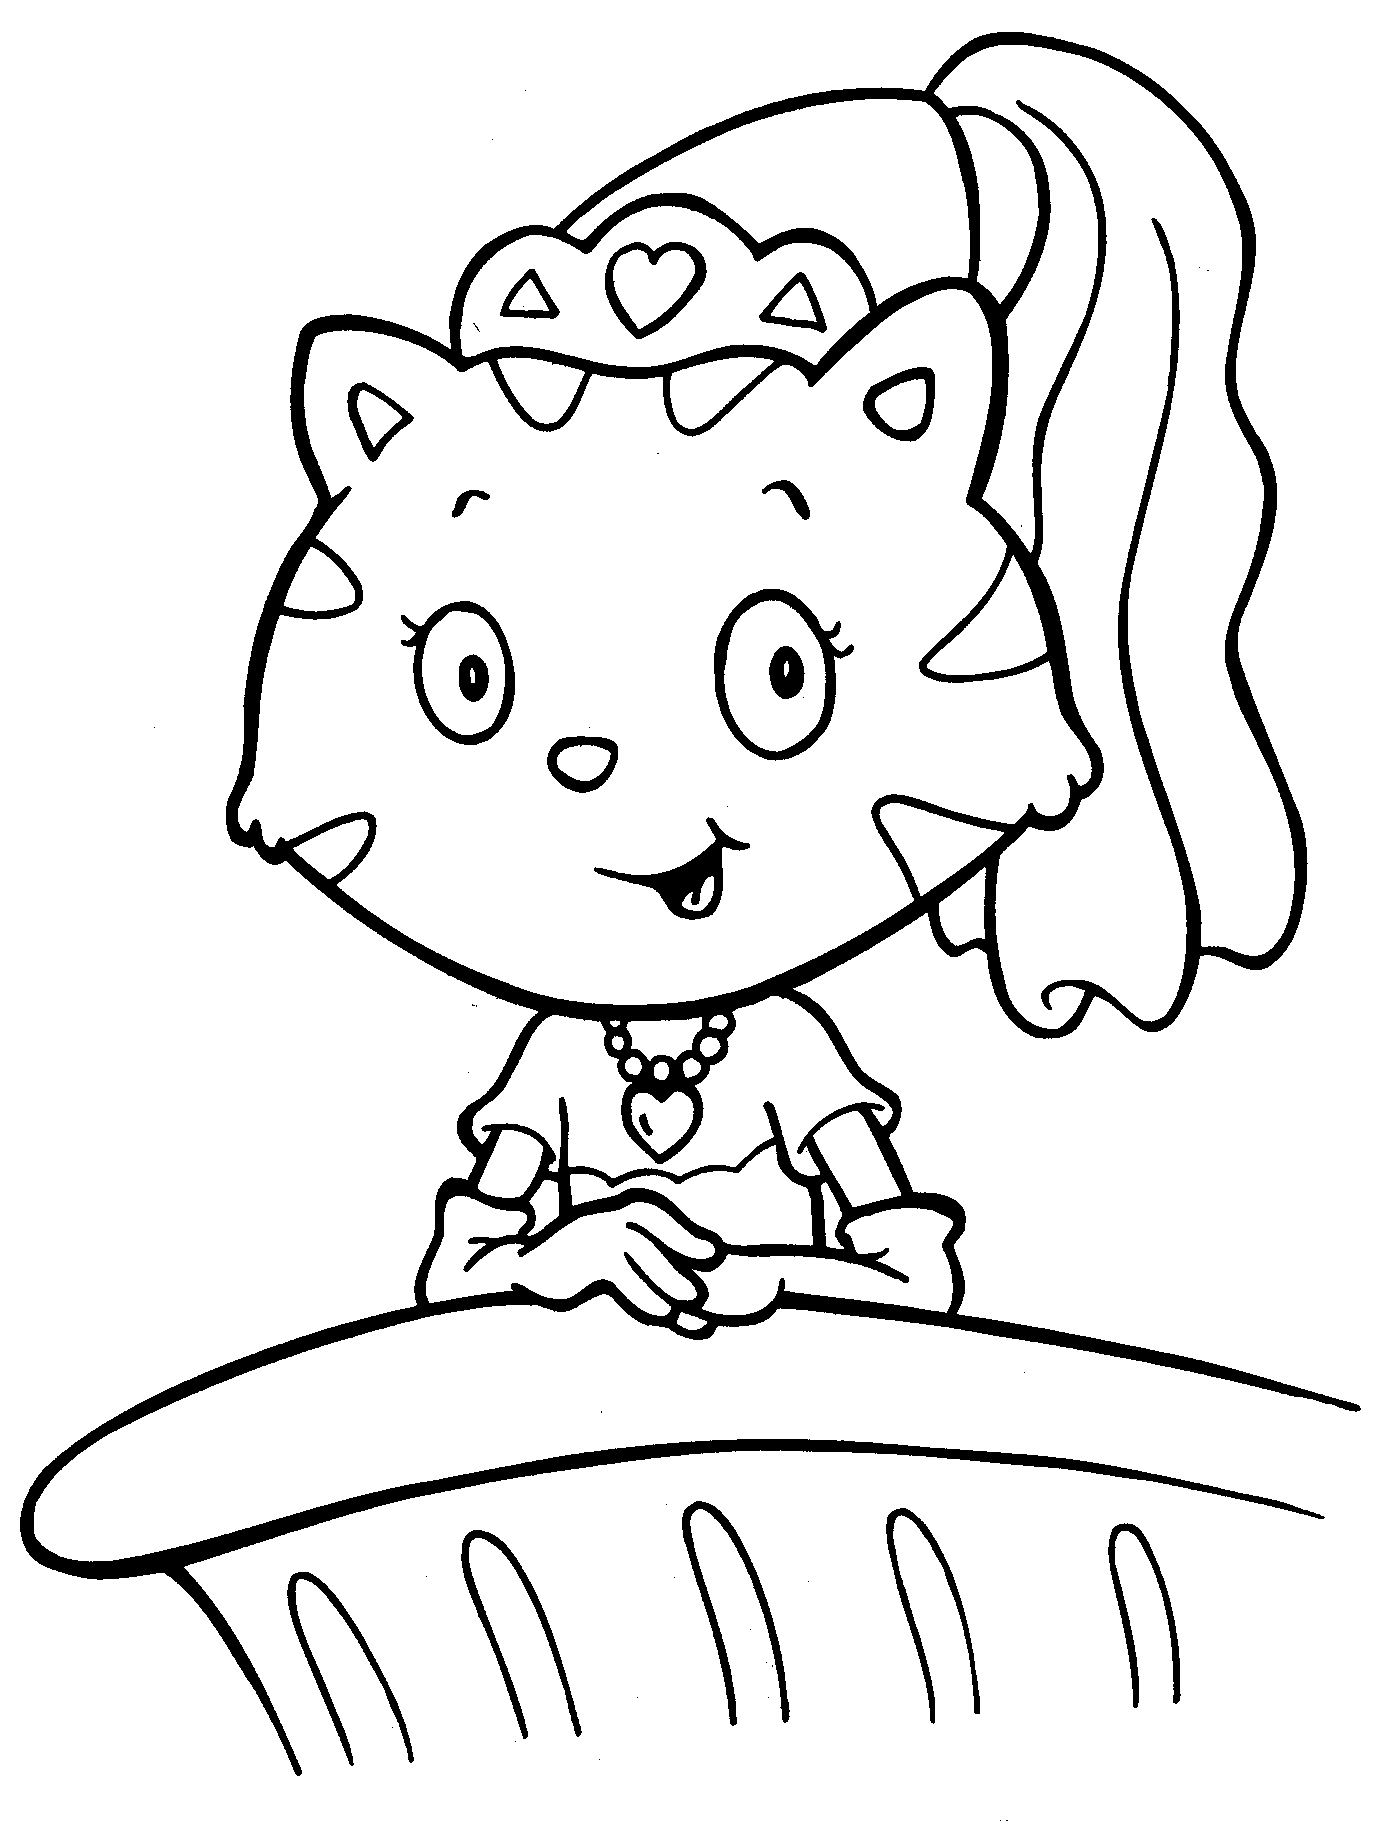 coloring book kitty kitten coloring pages best coloring pages for kids kitty coloring book 